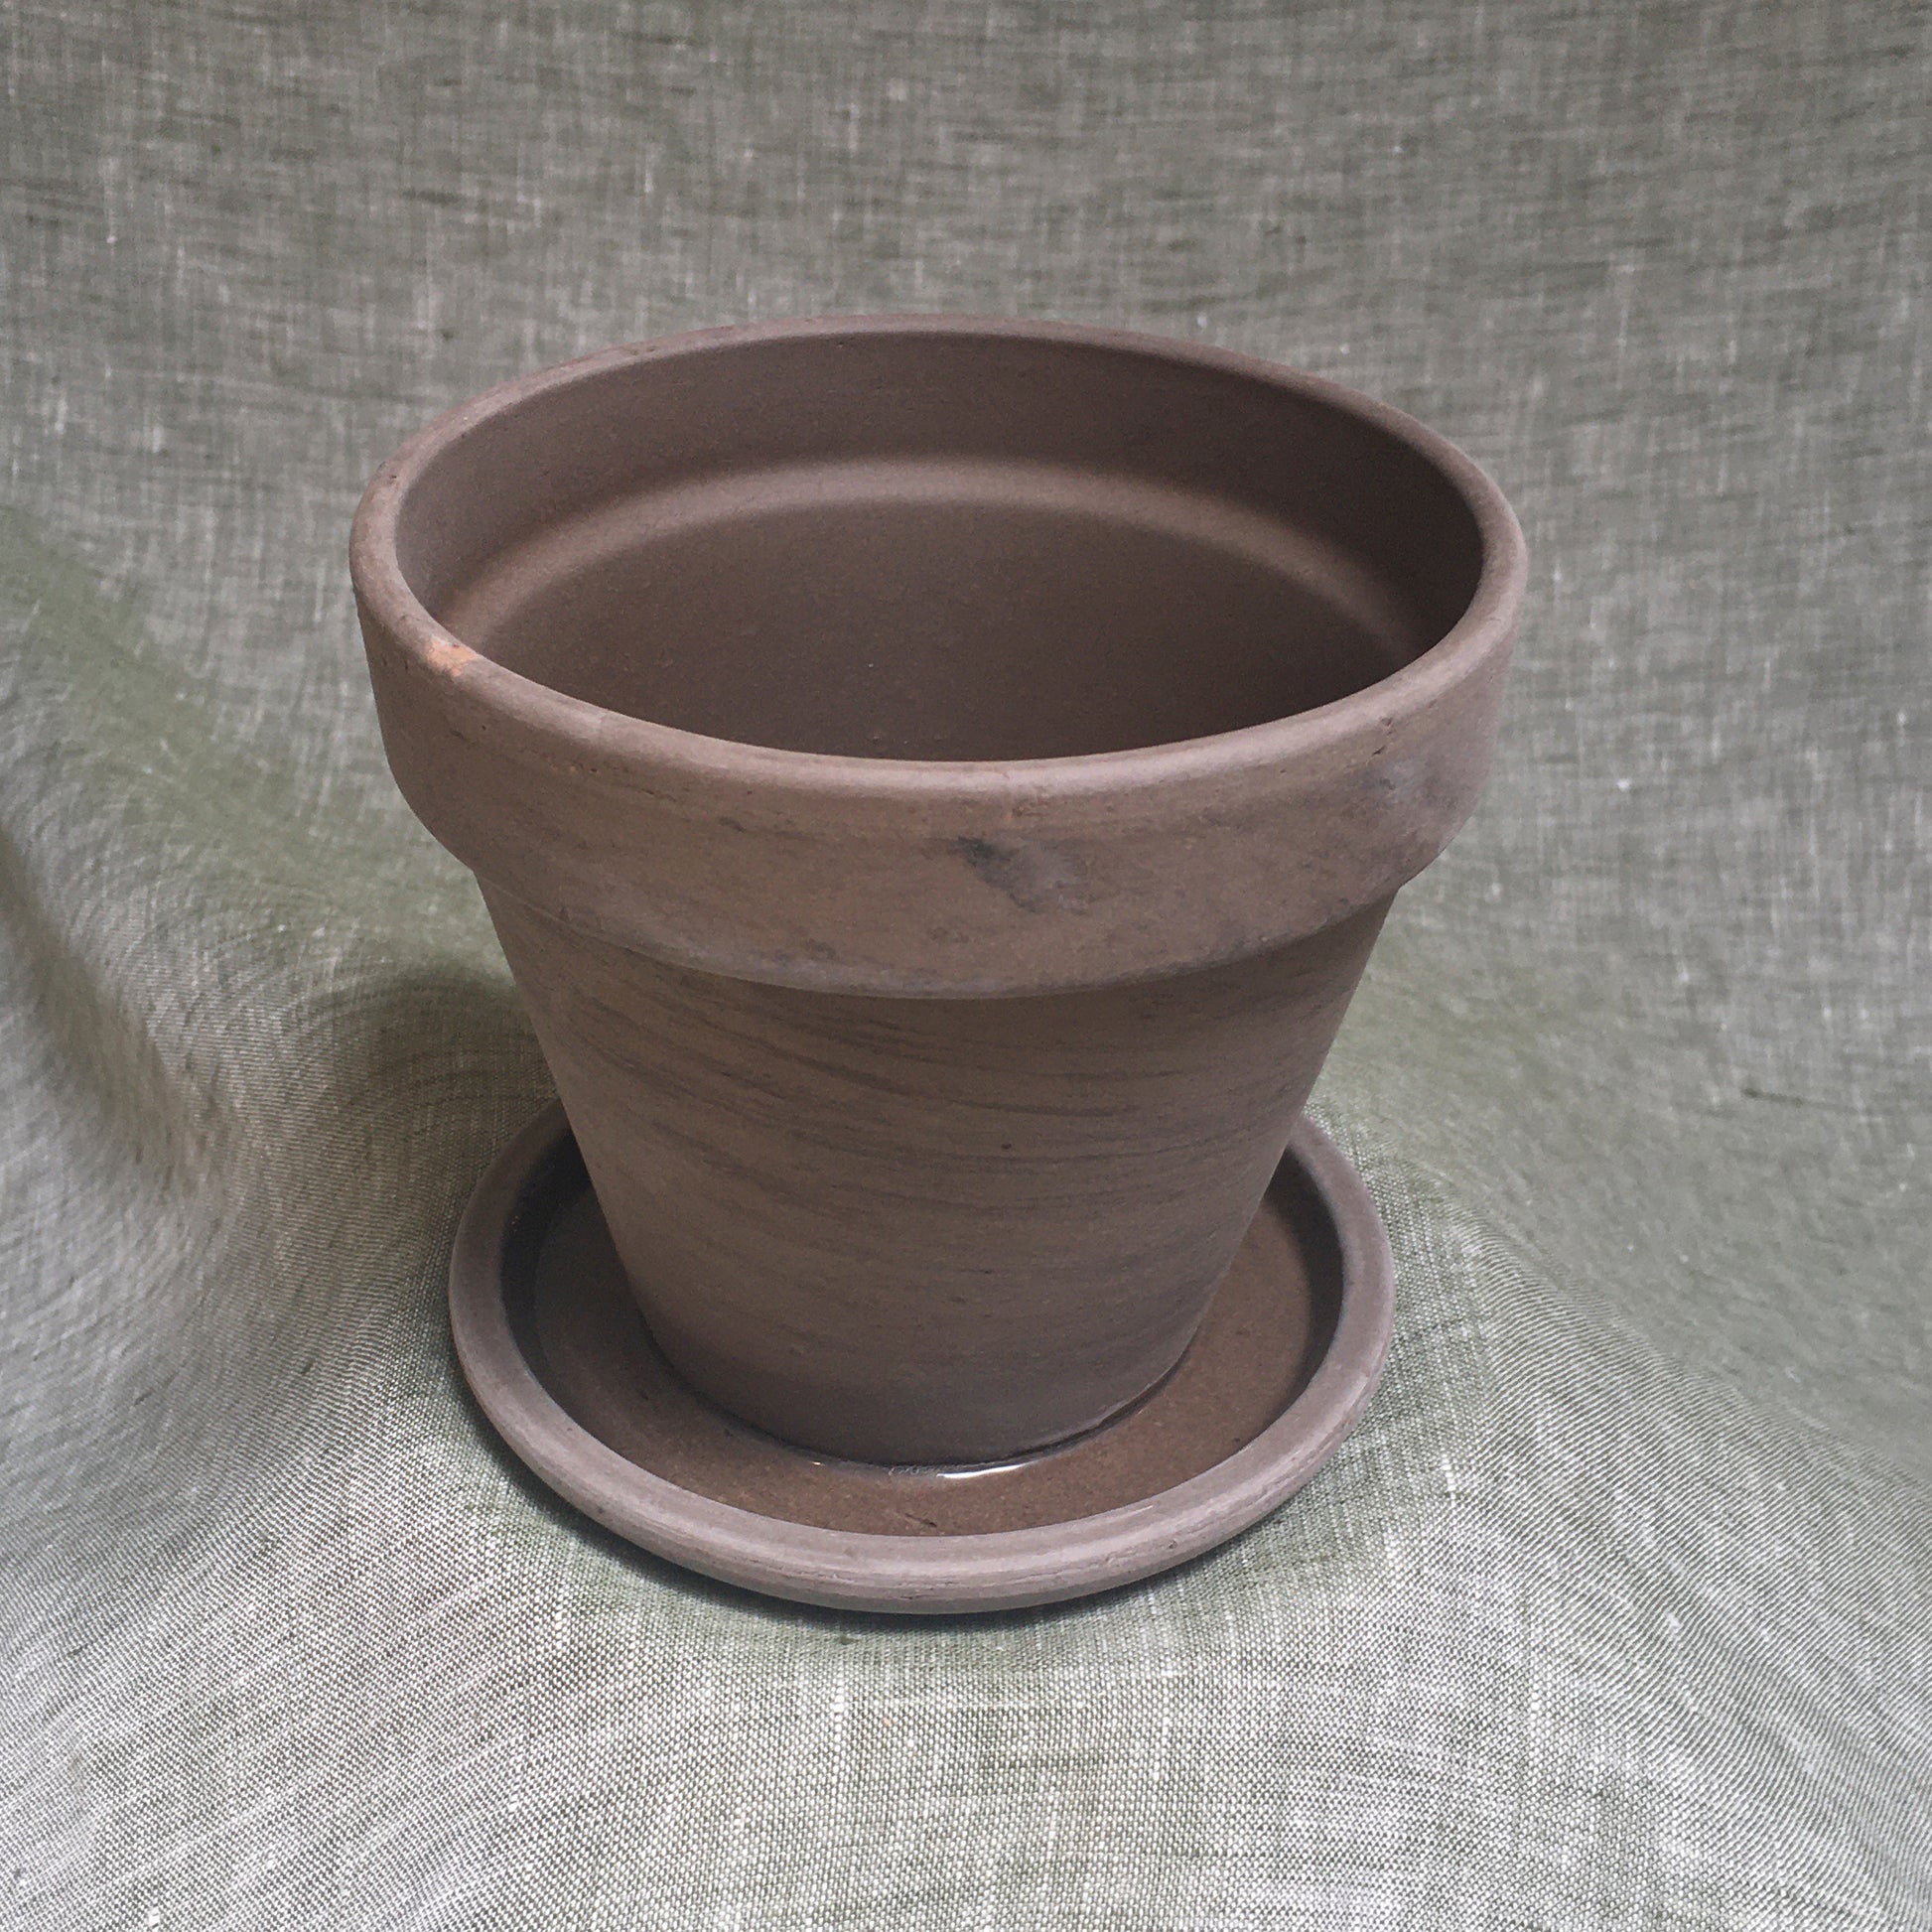 Medium brown clay pot with tray.